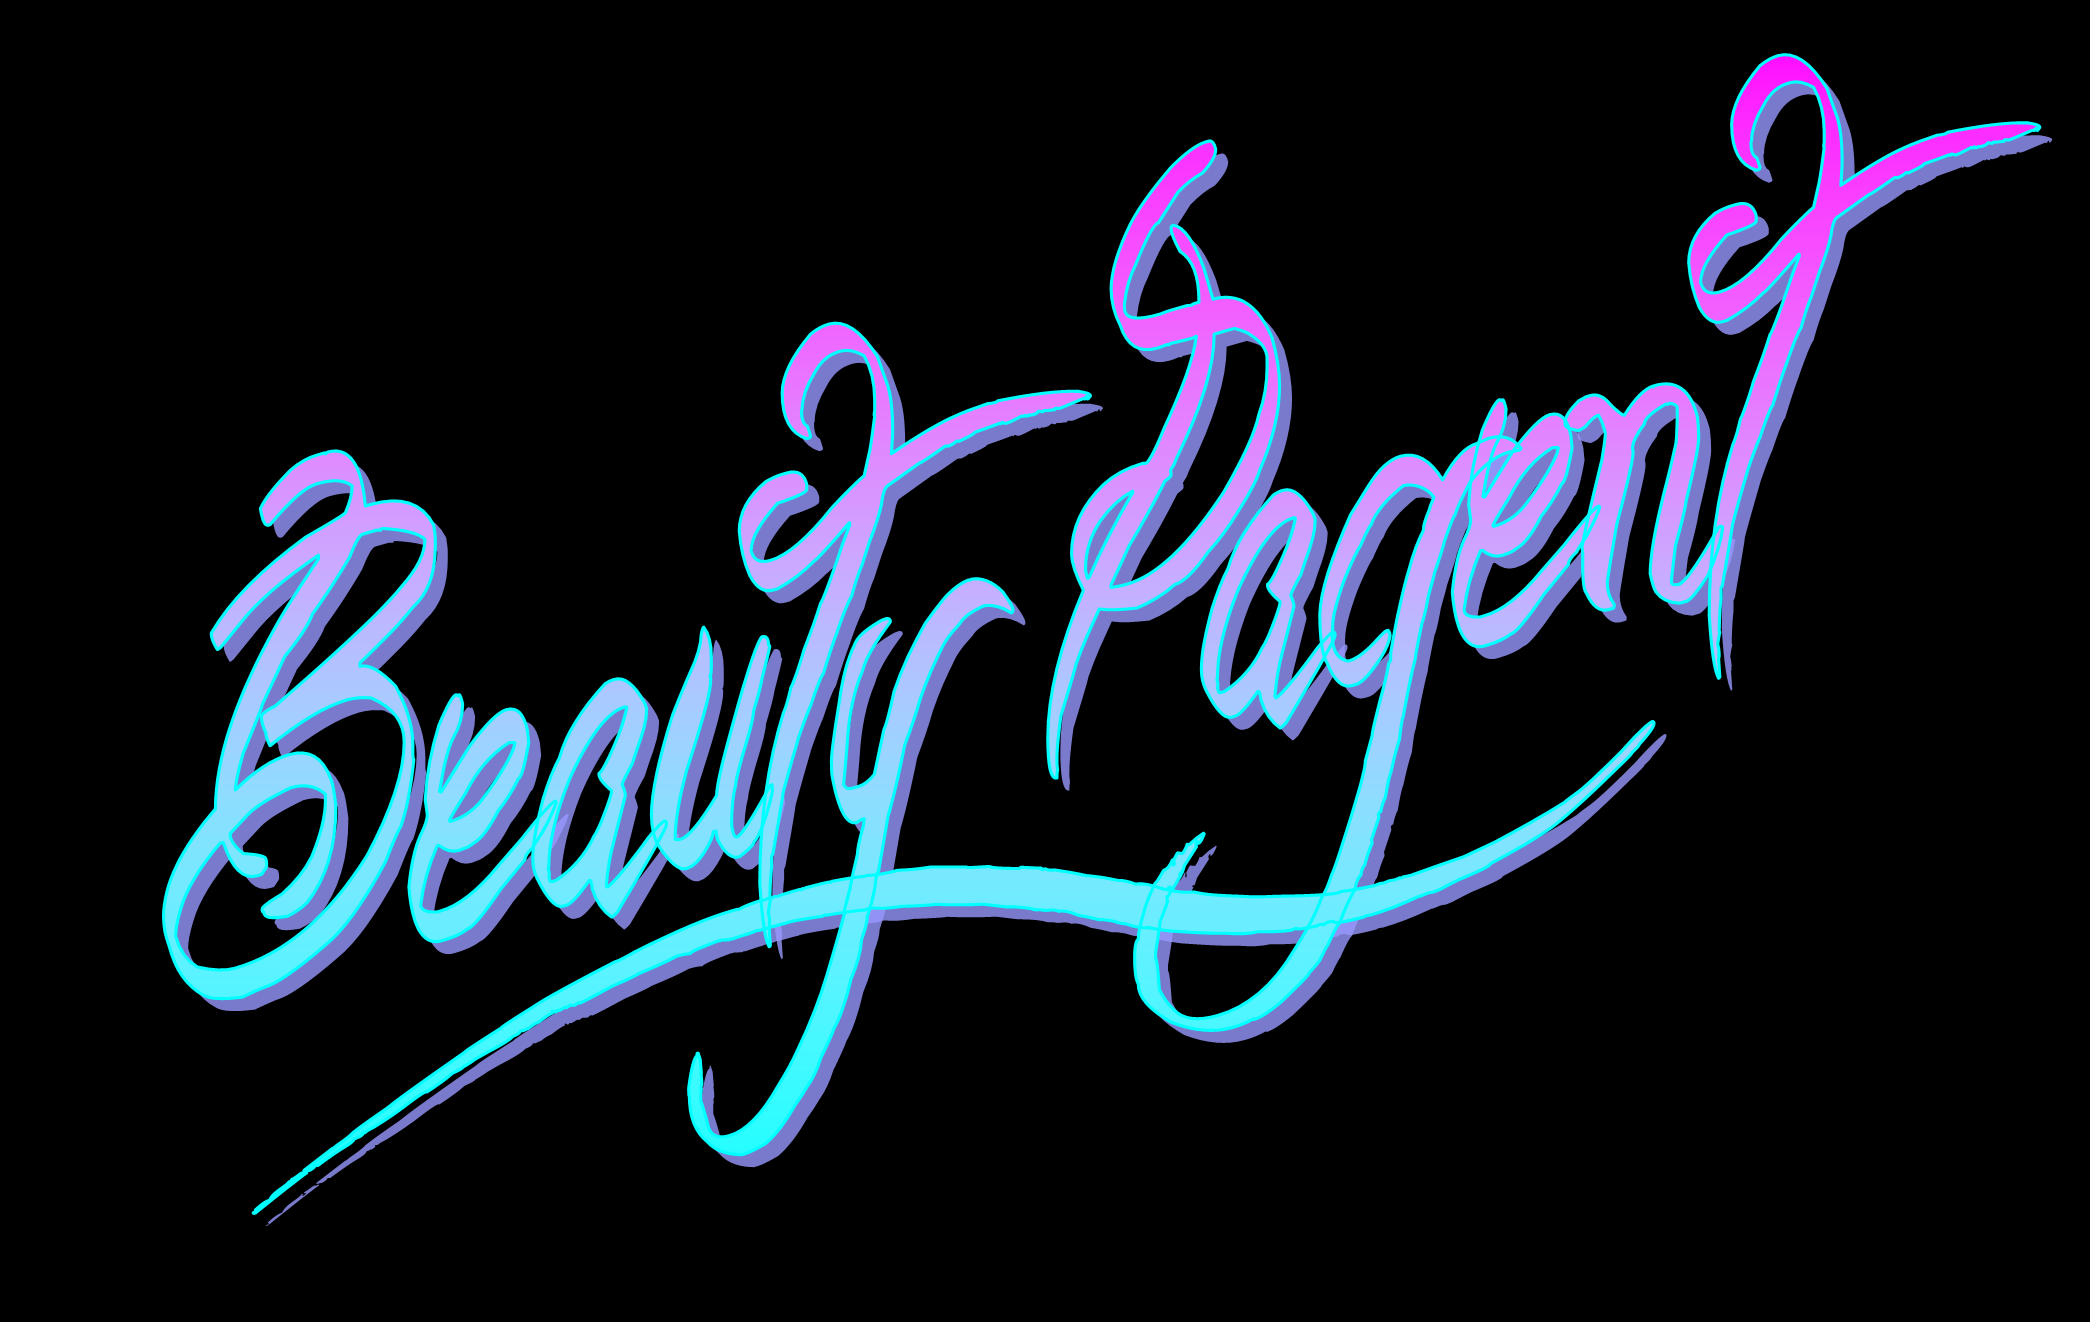 Beauty Pagent